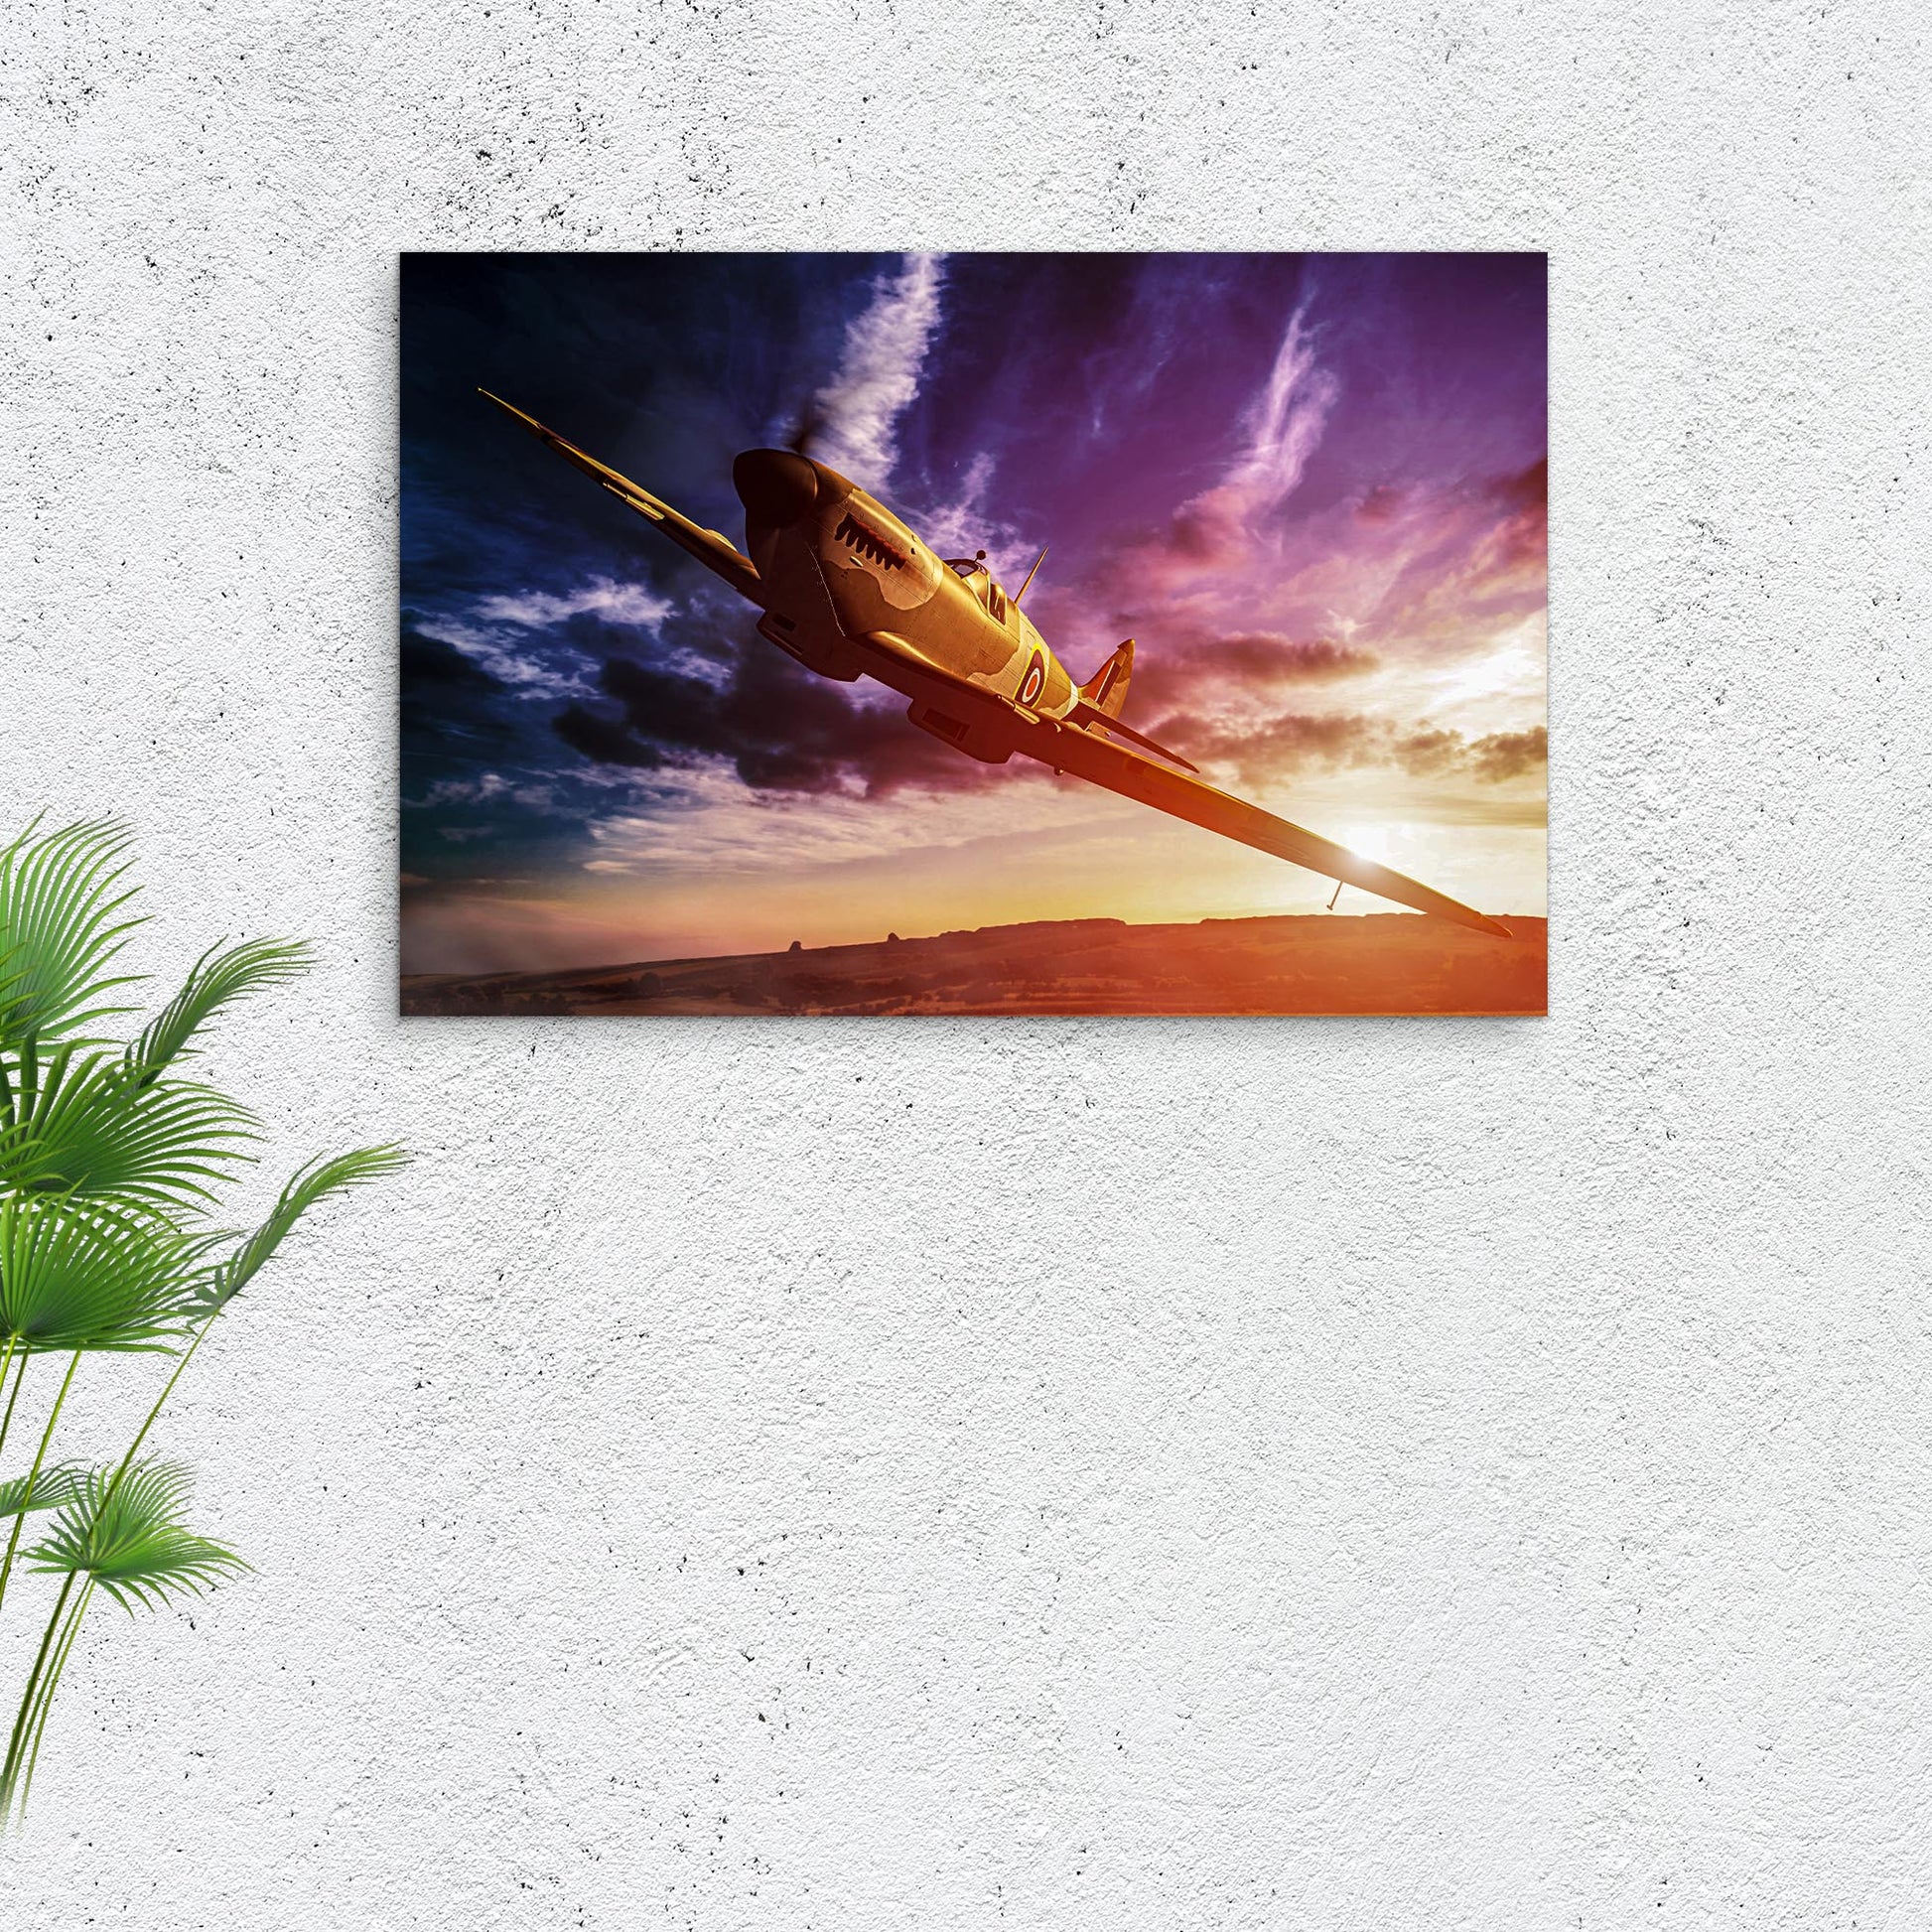 Fighter Plane Spitfire Canvas Wall Art Style 1 - Image by Tailored Canvases